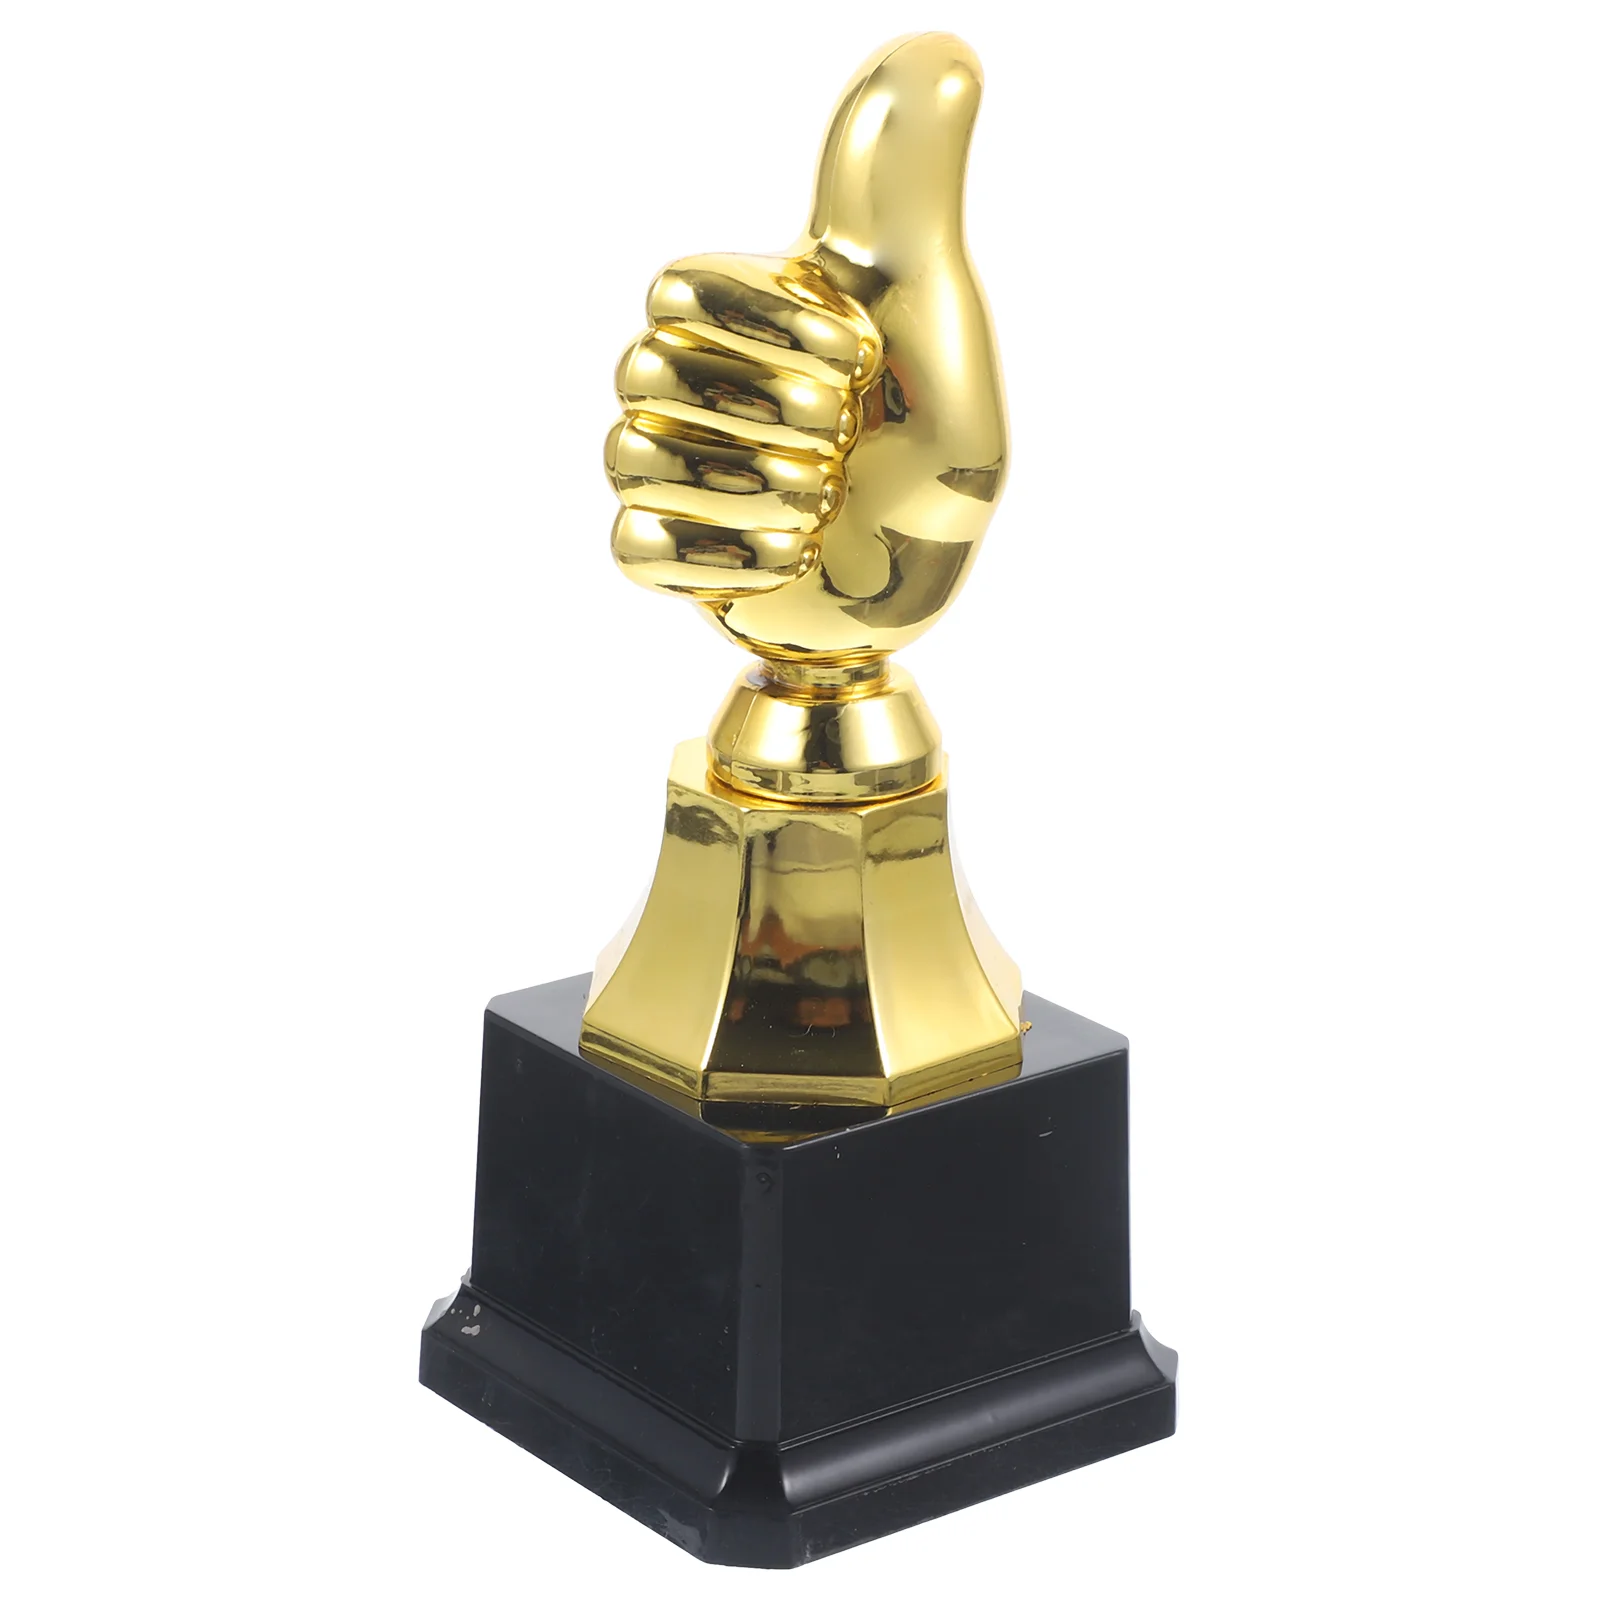 Children's Trophy Creative Thumb Soccer Medals The Game Kids Reward Toy Plastic Awards Staff Football Gifts